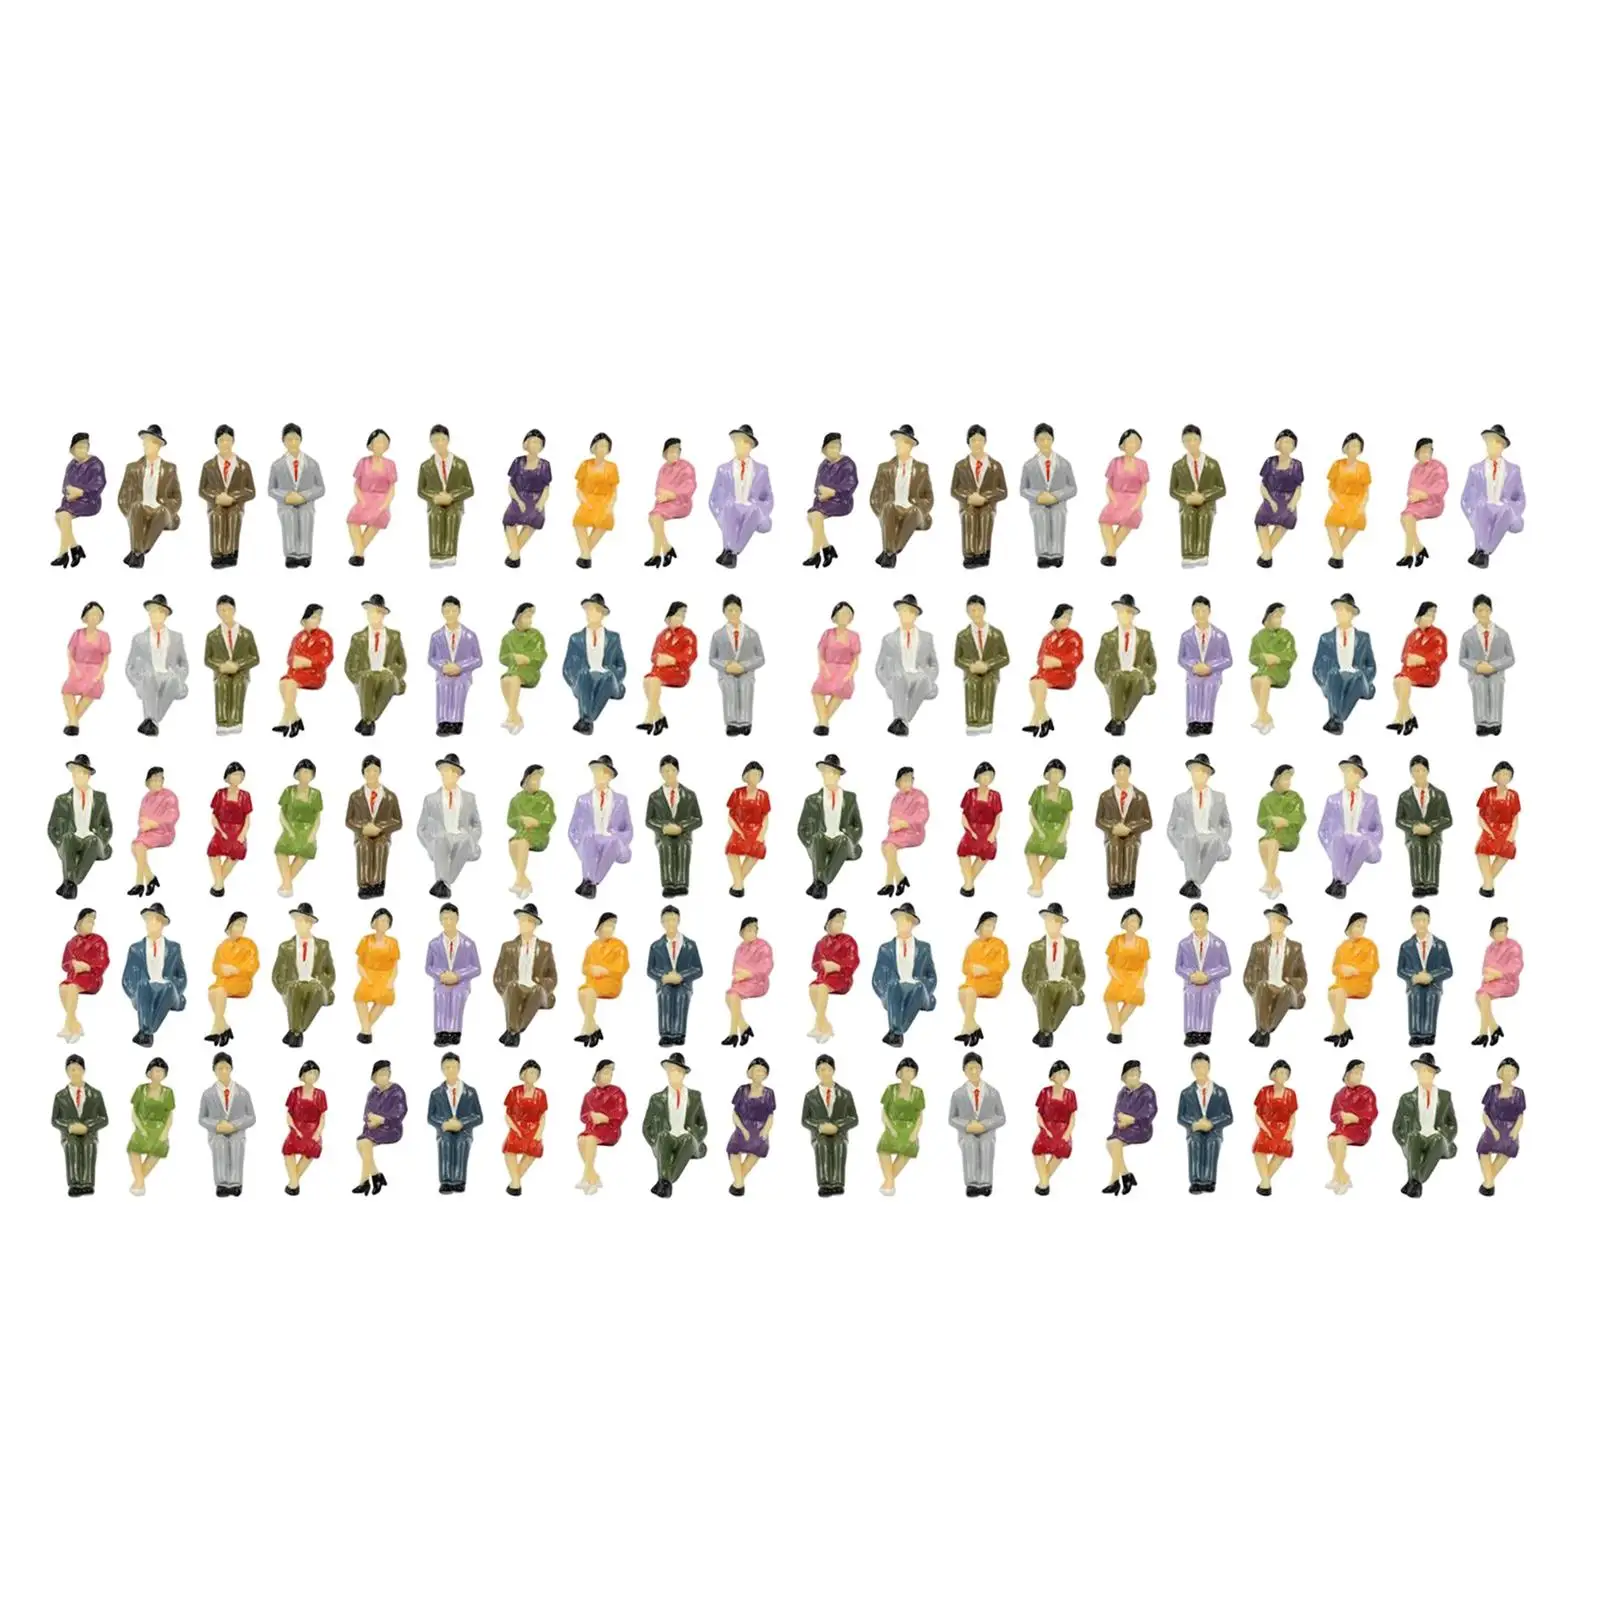 100Pcs 1:30 Figures Handpainted Model in Sitting Pose Woman and Man for Model Train Building Model Architectural Layout Decor